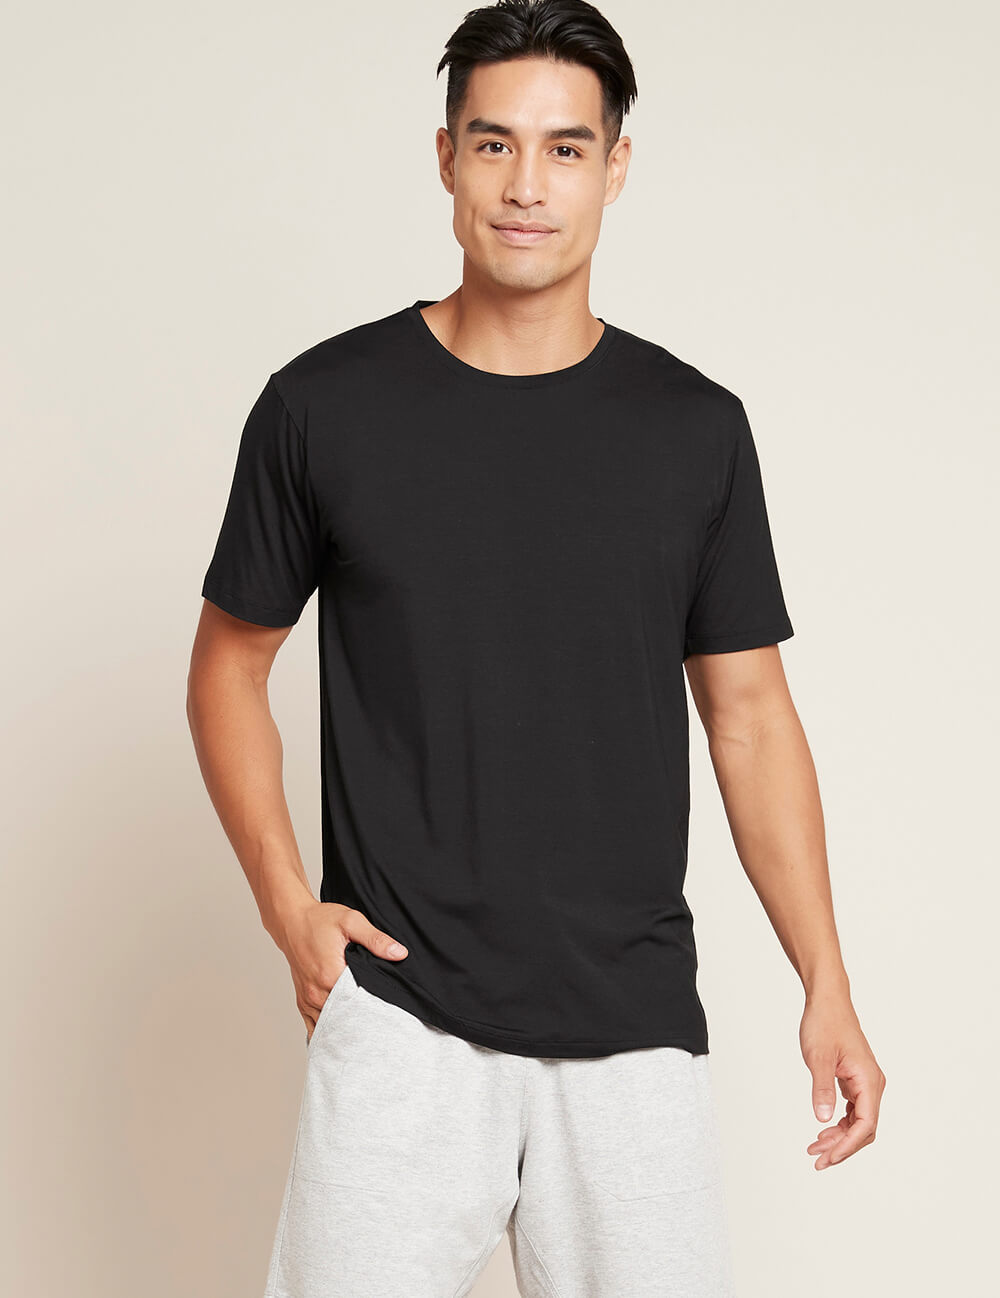 Boody Bamboo Mens Crew Neck Shirt in Black Front View